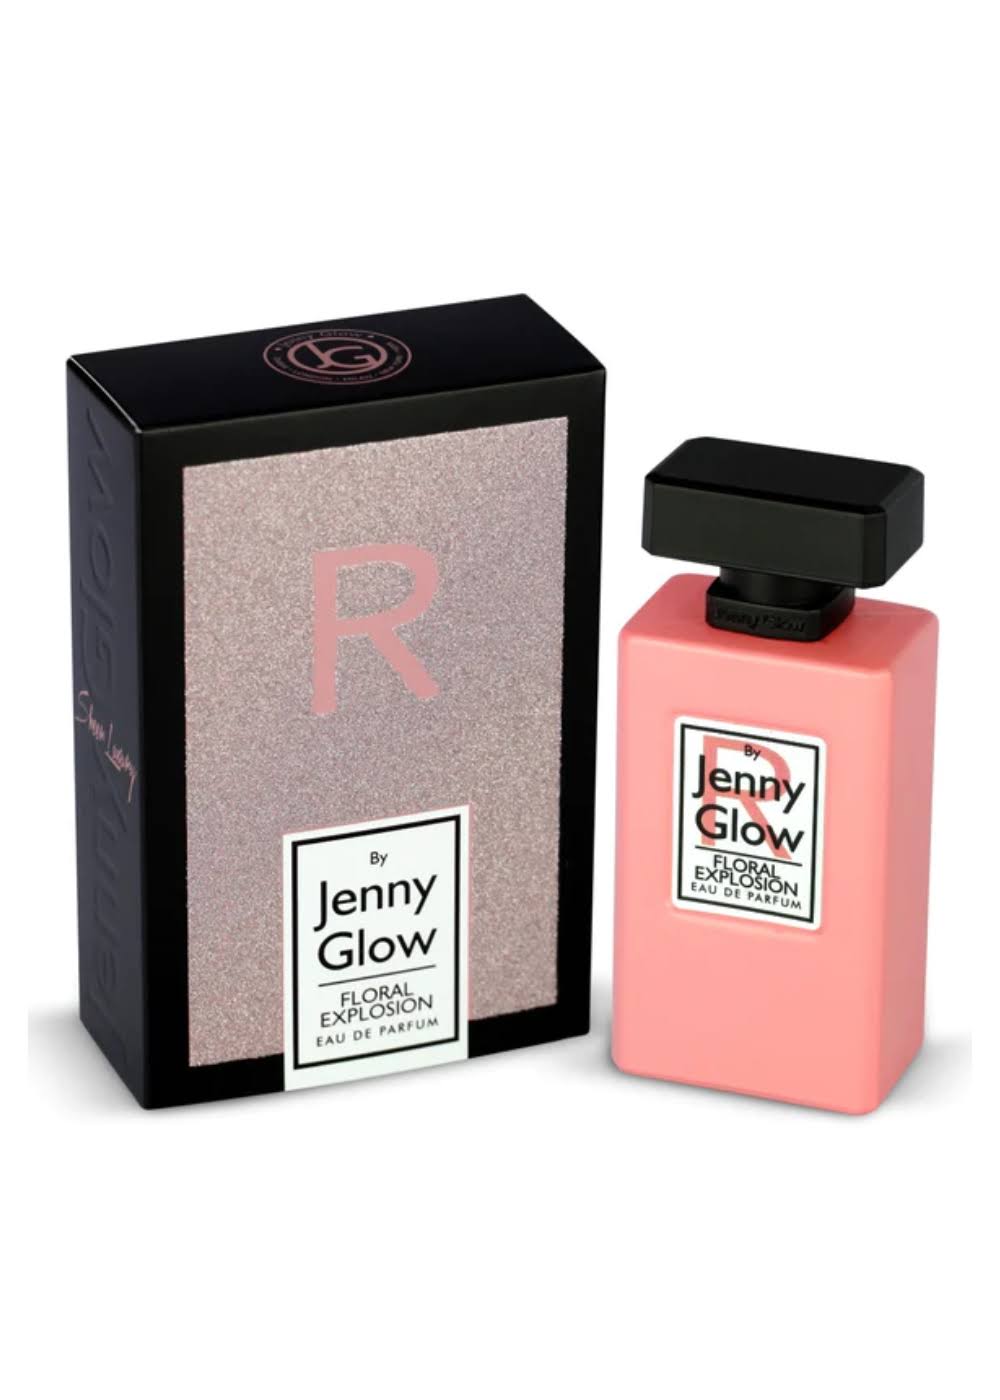 R by Jenny Glow Floral Explosion 30ml